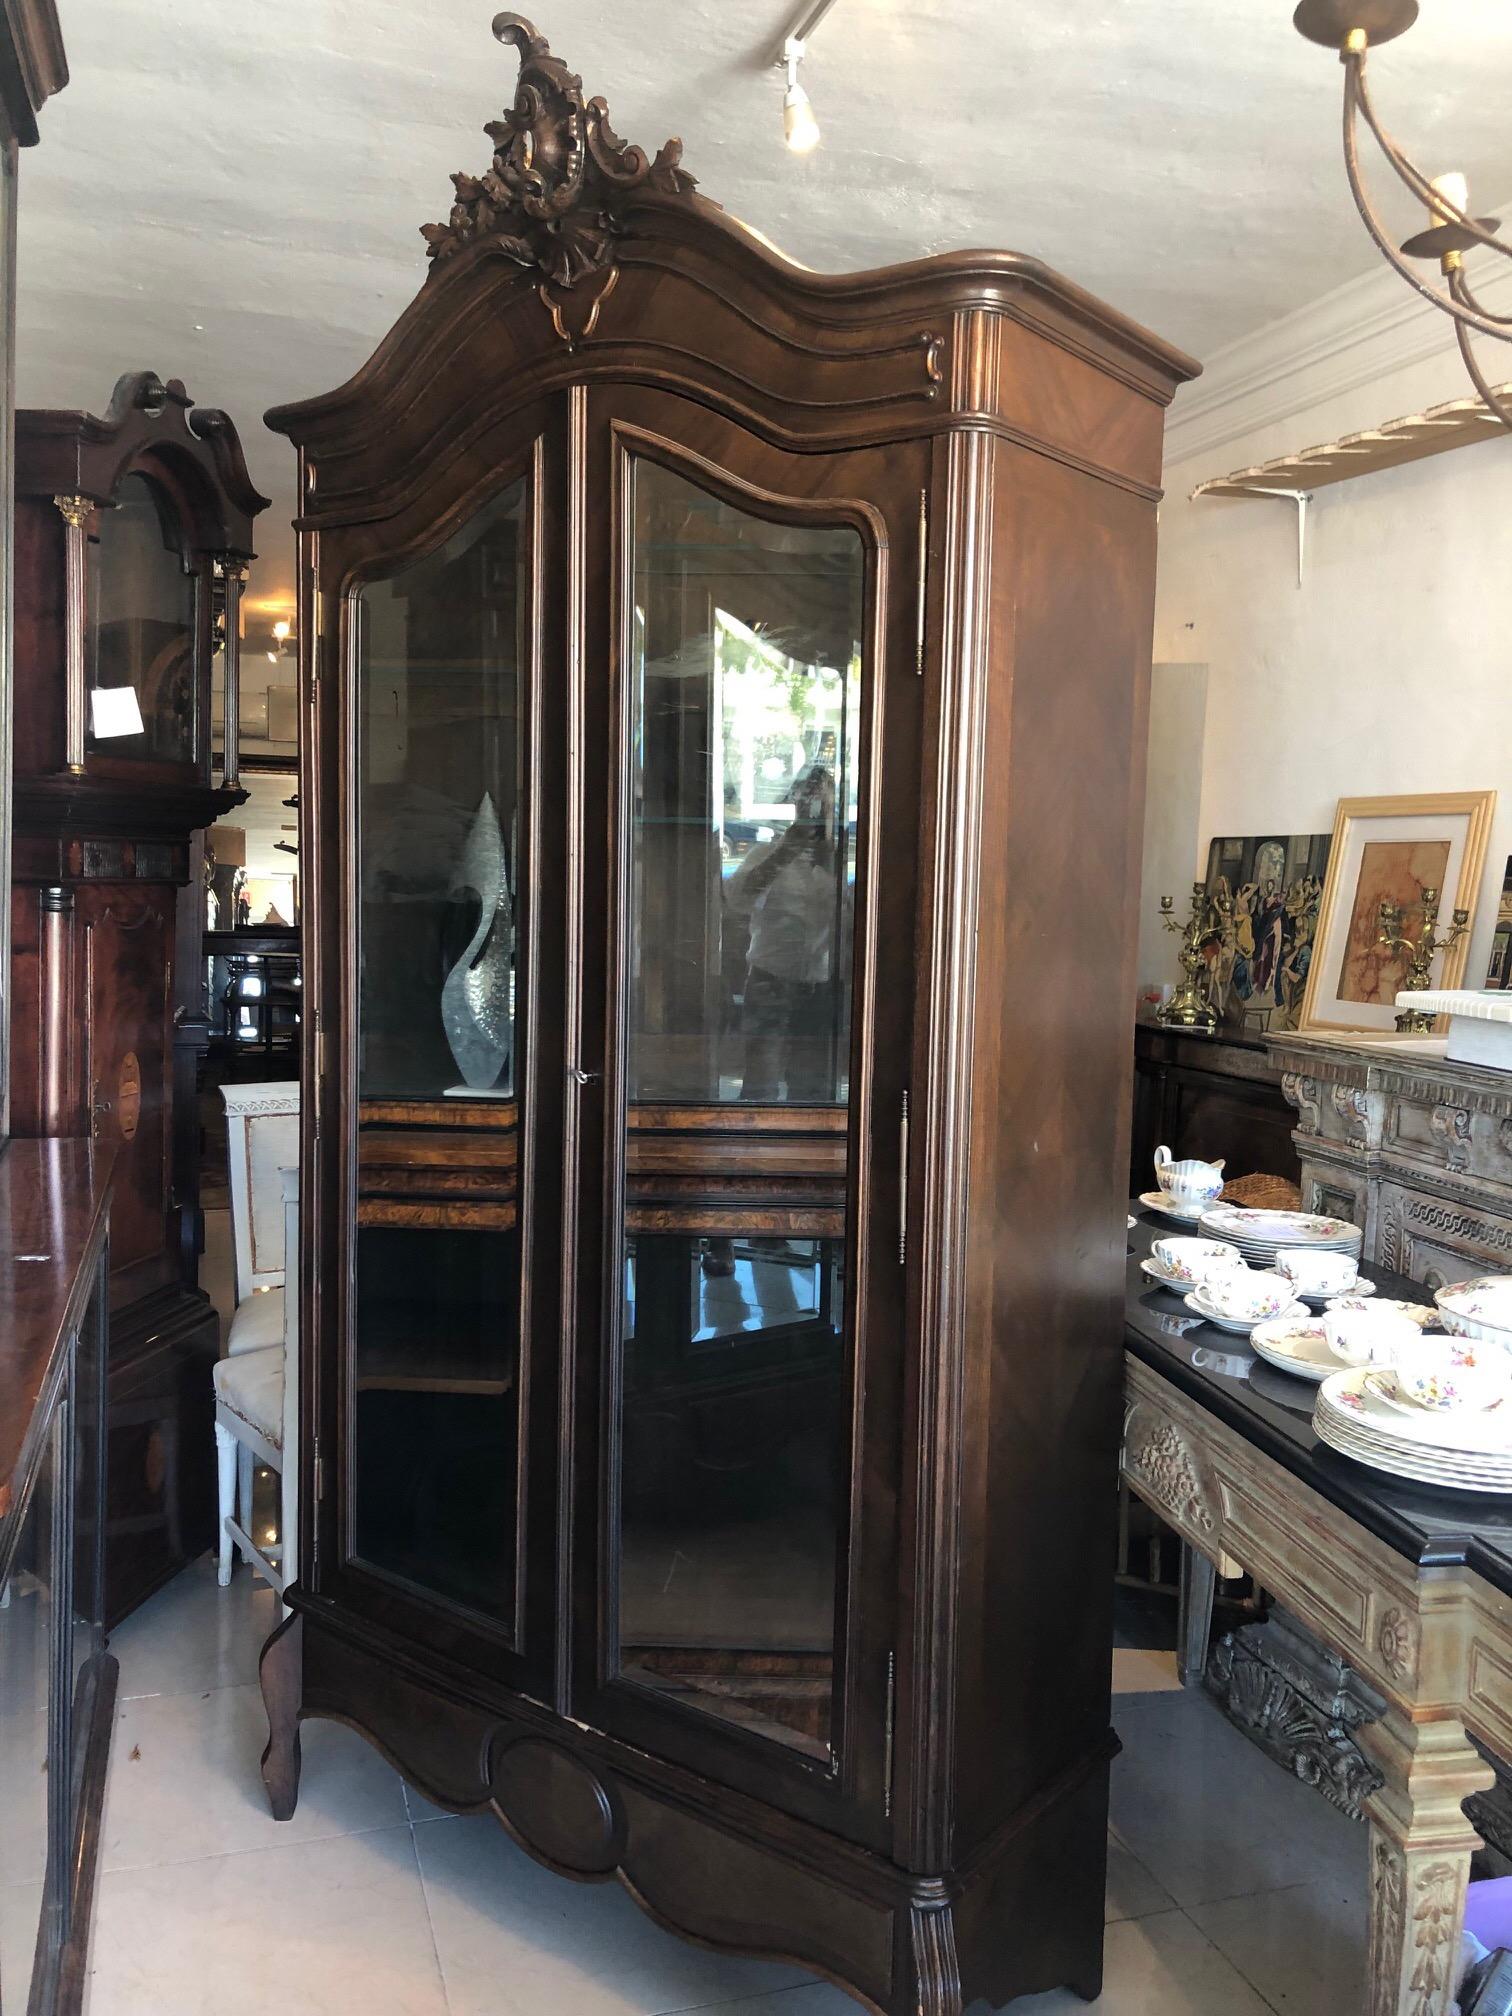 This is a very nice antique French armoire in excellent condition, it may have been refinished at some time.
There are two mirrored doors very nice carving to the top in the Rocco style.
This comes apart so its easy to move.
Just one little age